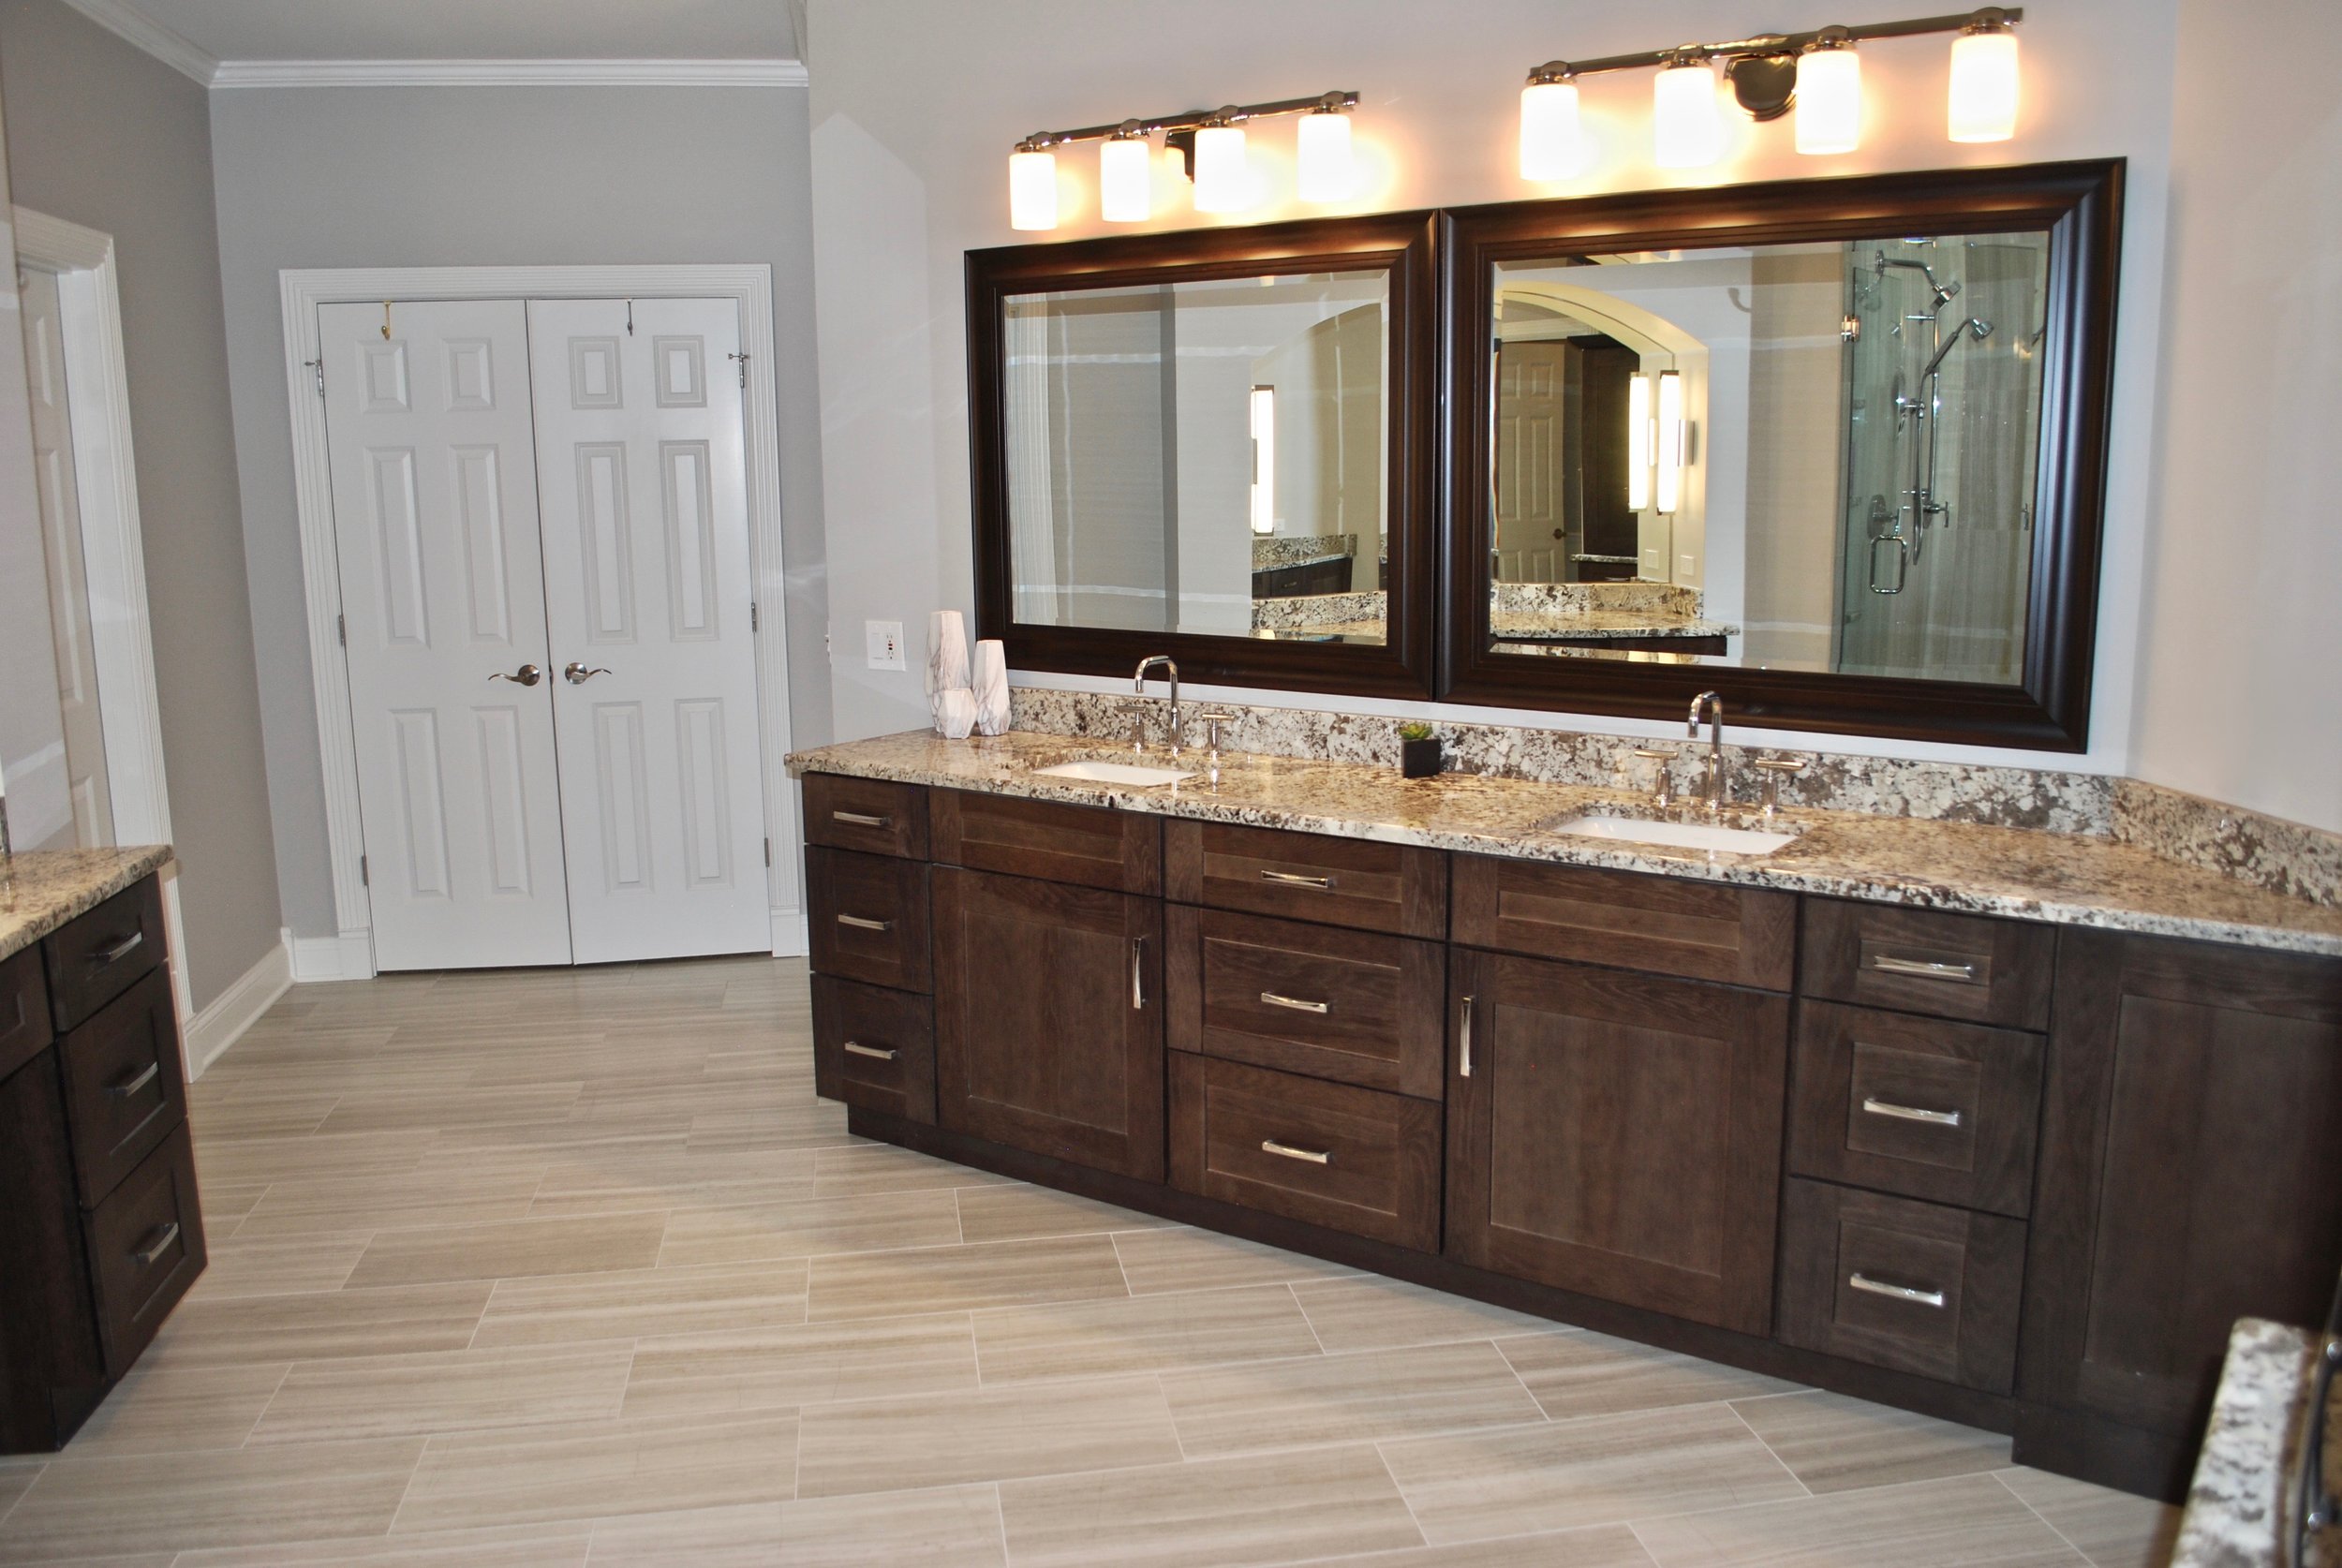 BATHROOM REMODEL IN THIS LARGE NAPERVILLE IL. CUSTOM HOME.  NEW MASTER BATHROOM WITH LARGER SHOWER